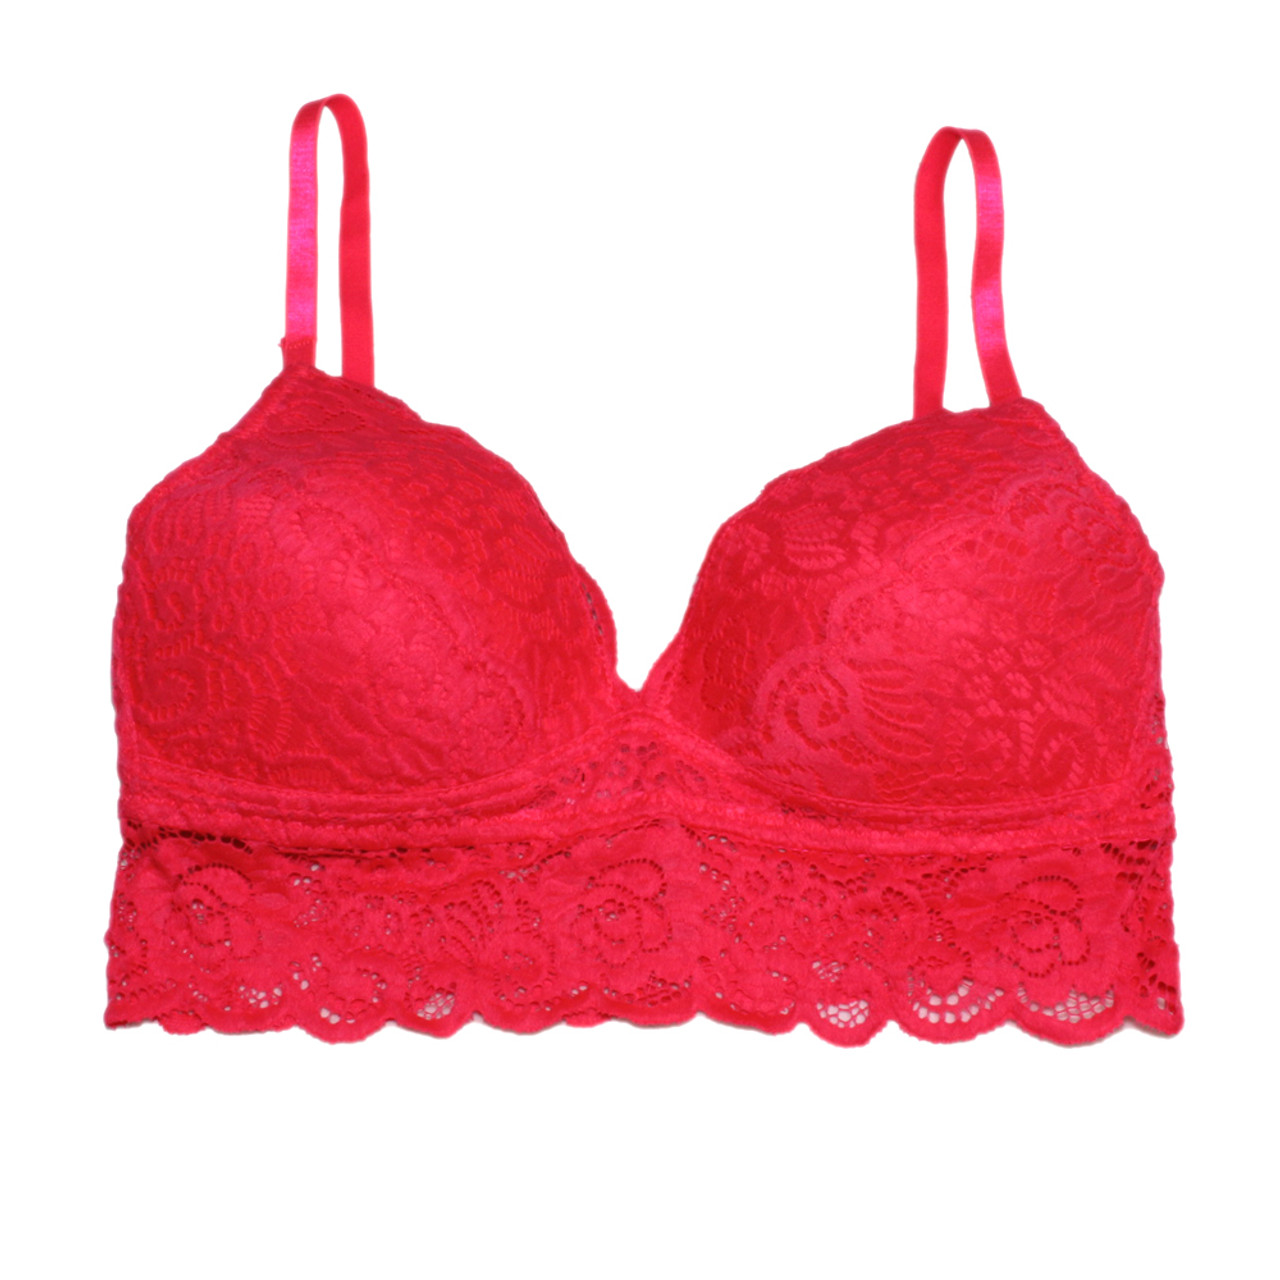 Buy Lace Bra Plus Size B C D Cup Underwire Gather Adjustment Plunge  Lingerie Bras for Embroidery Underwear BH Top Red Cup Size 65D at